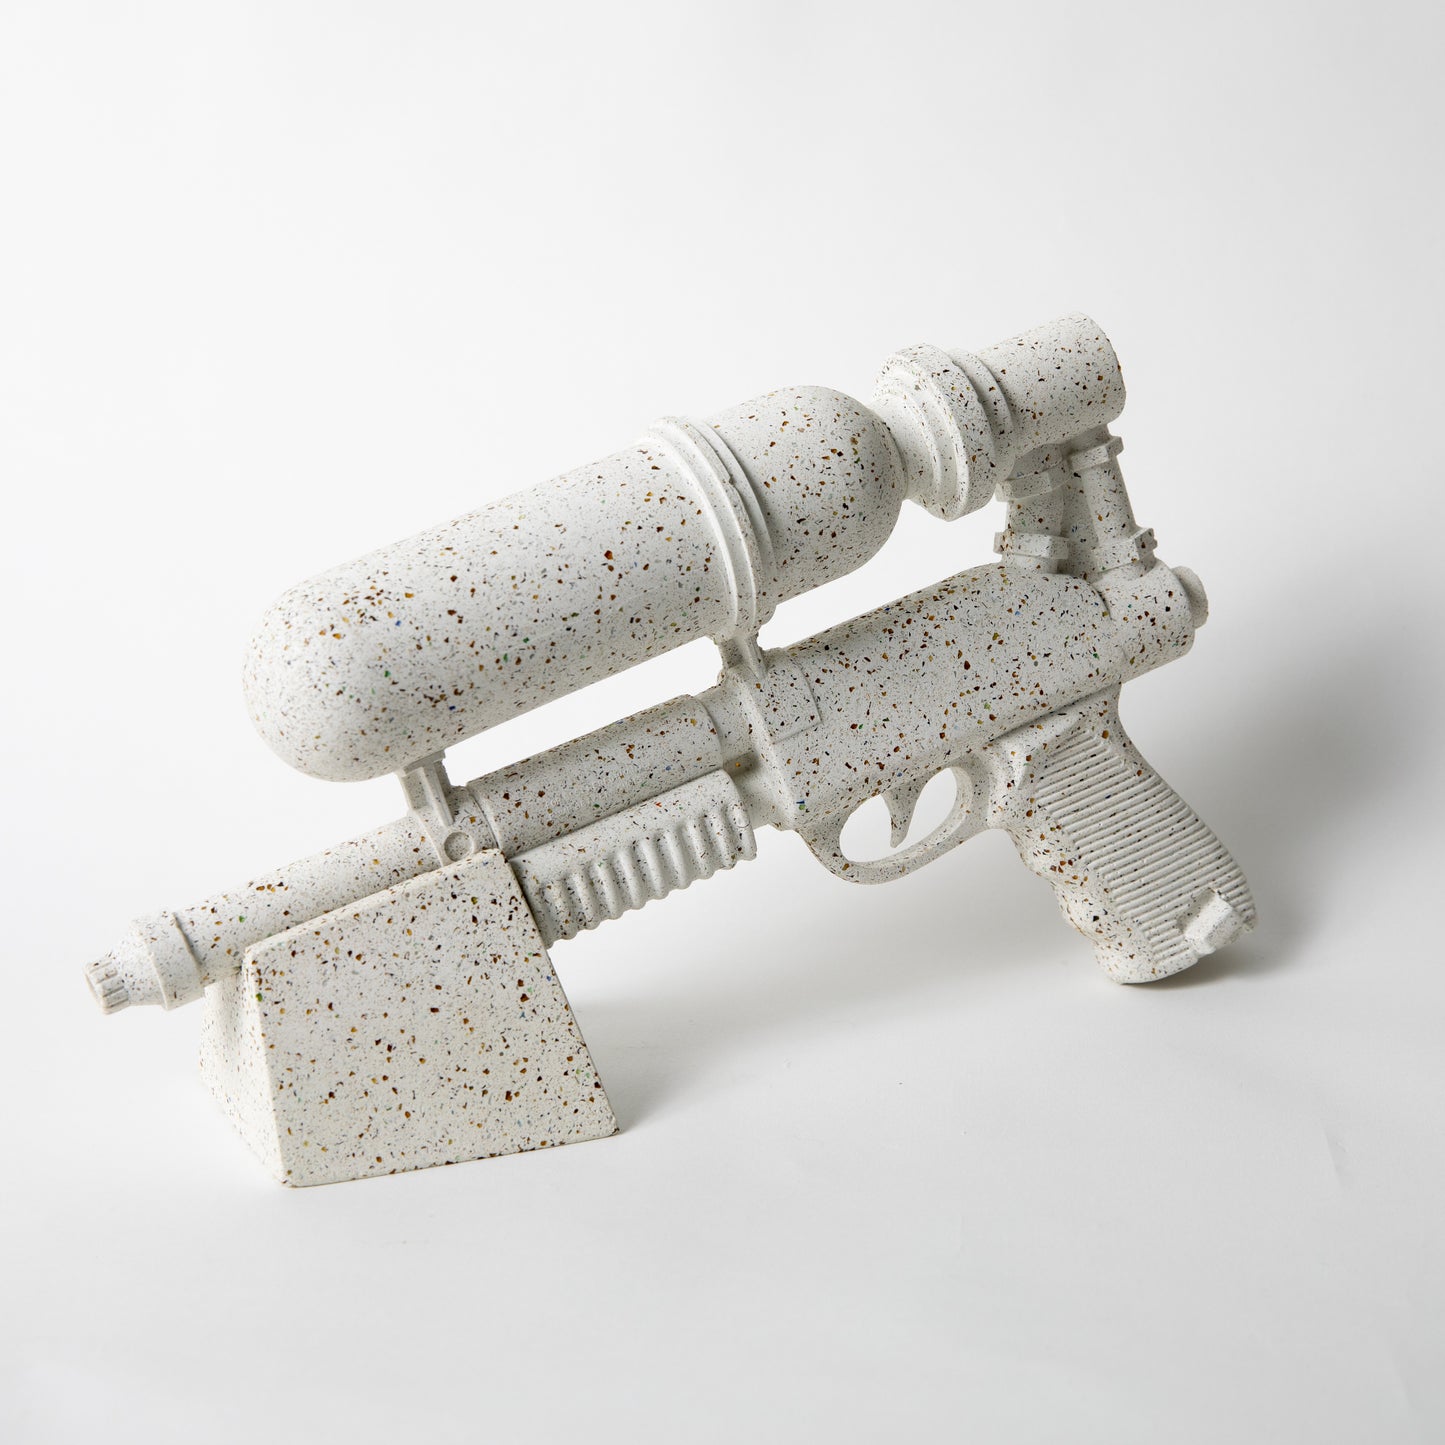 The Ultra Sprayer Sculpture in White Terrazzo, resting on a stand.